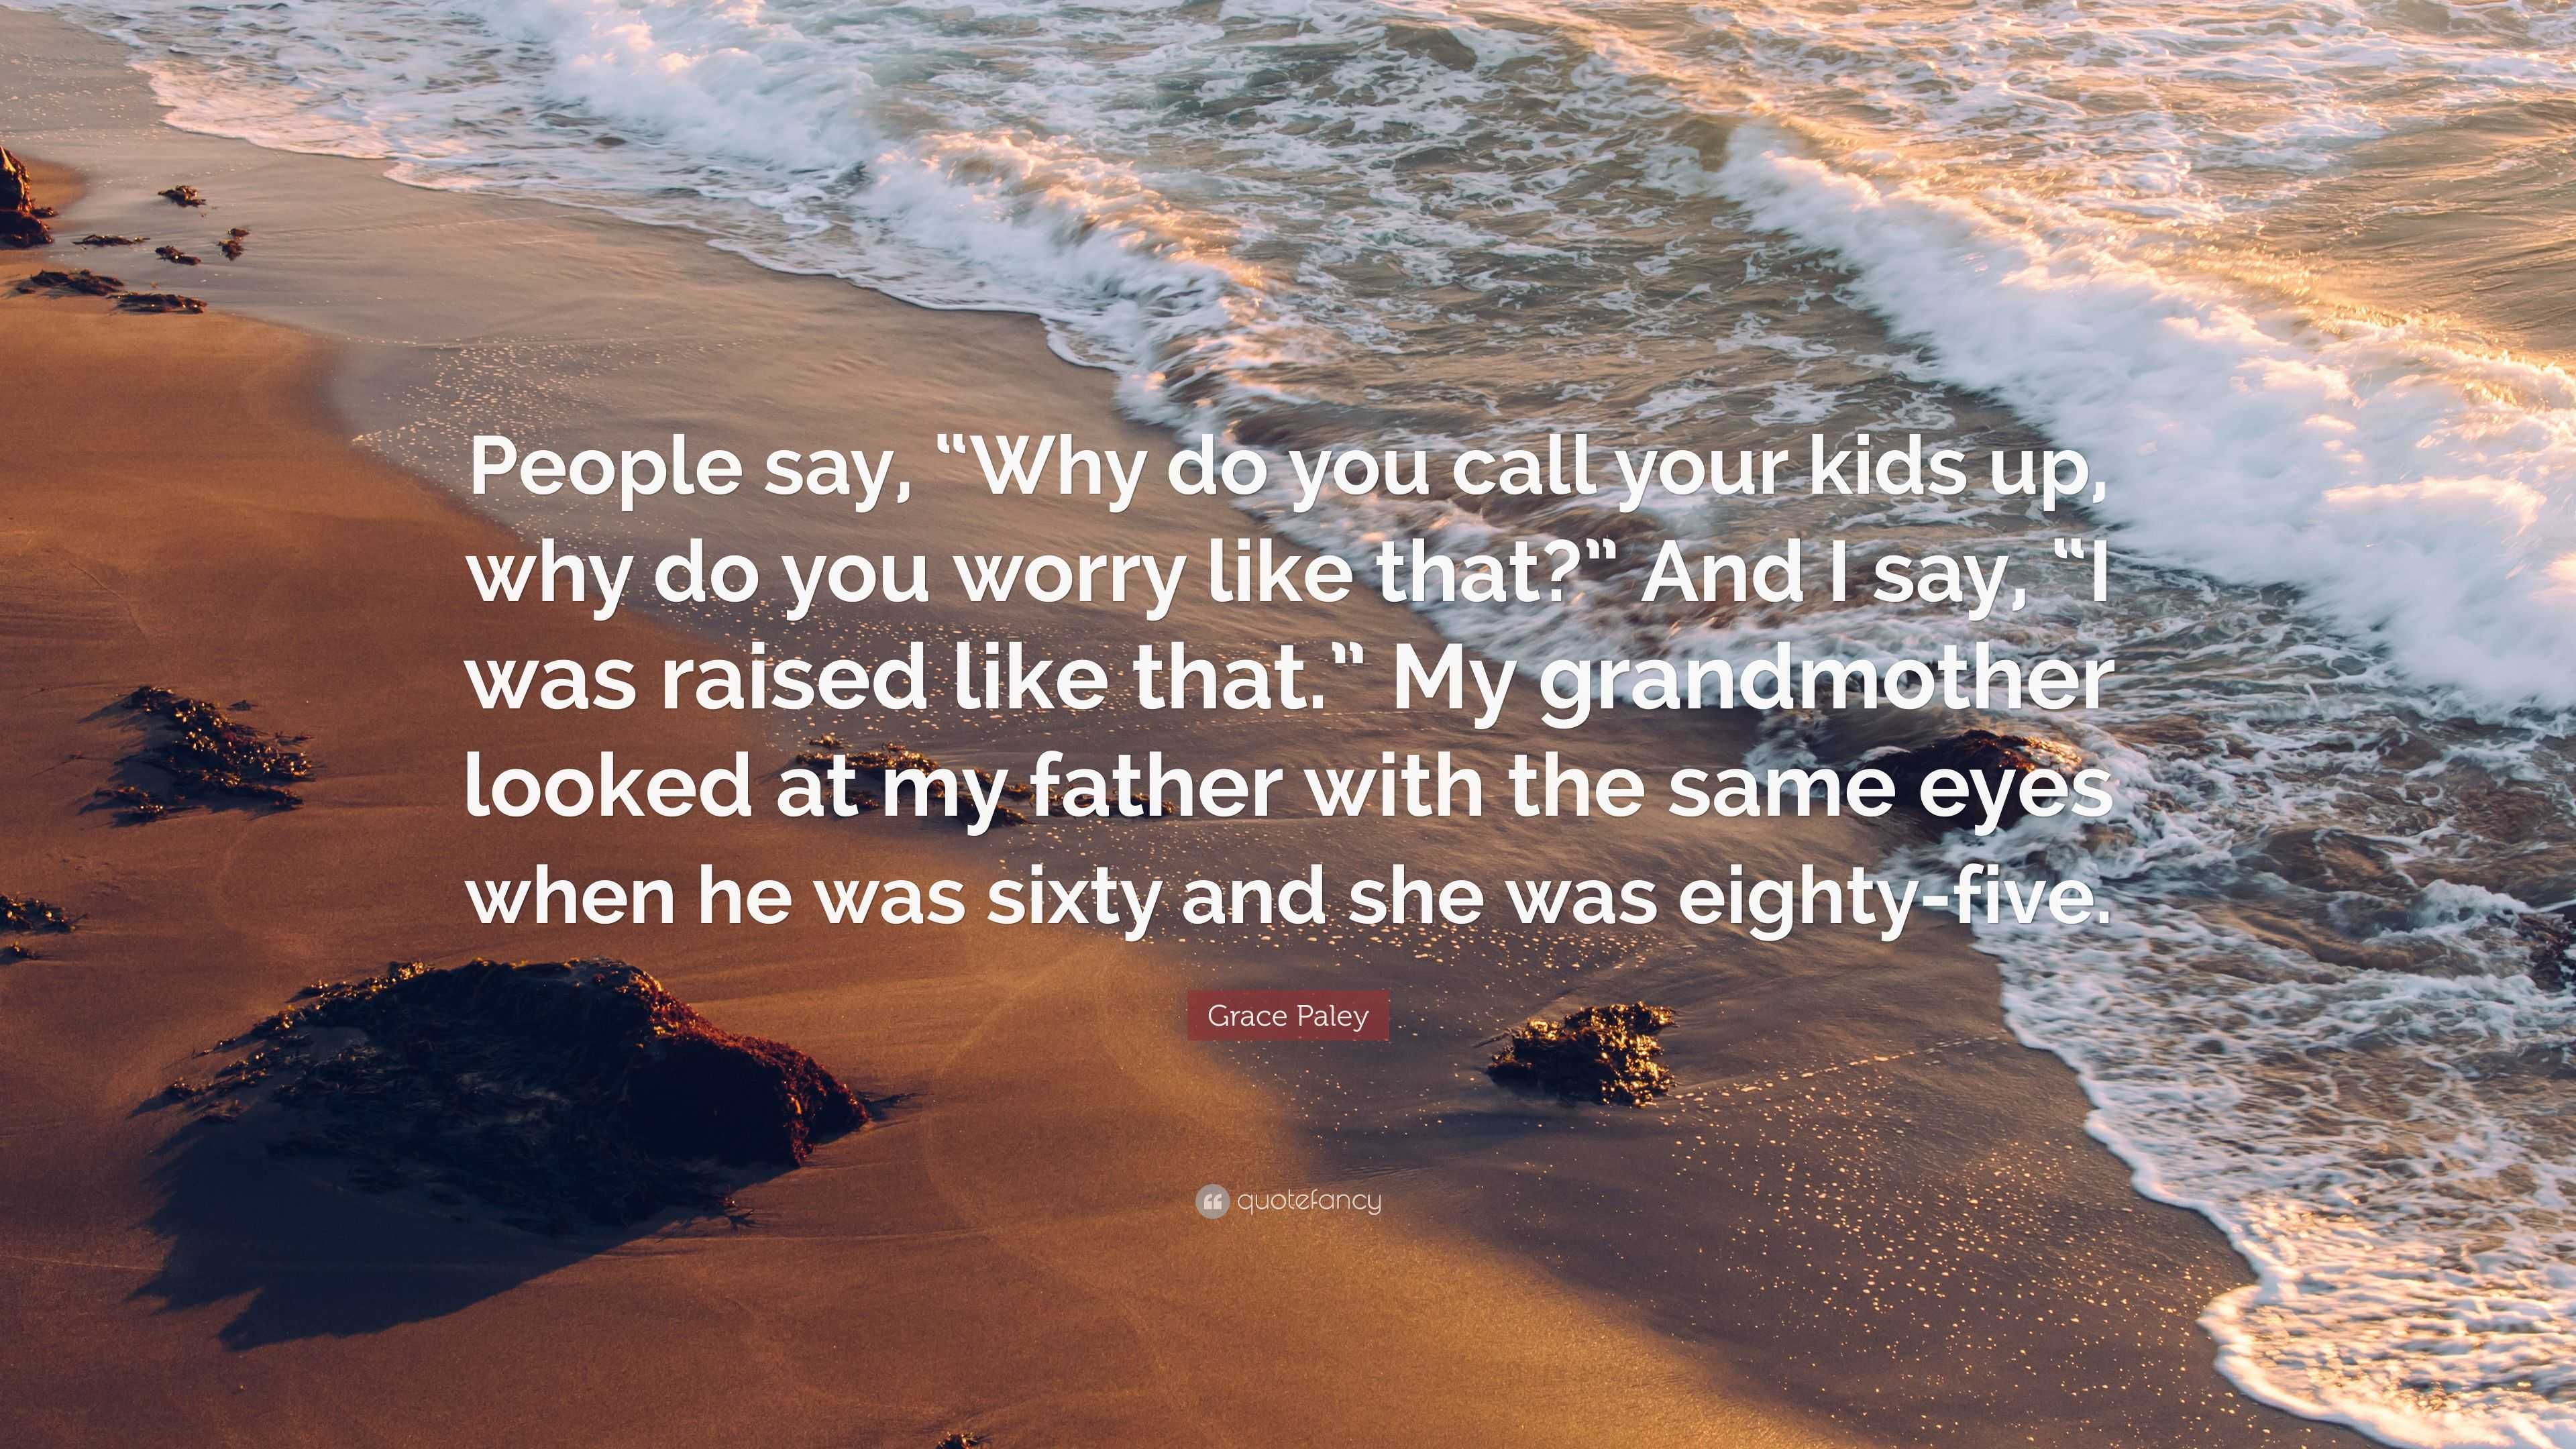 Grace Paley Quote: “People say, “Why do you call your kids up, why do ...